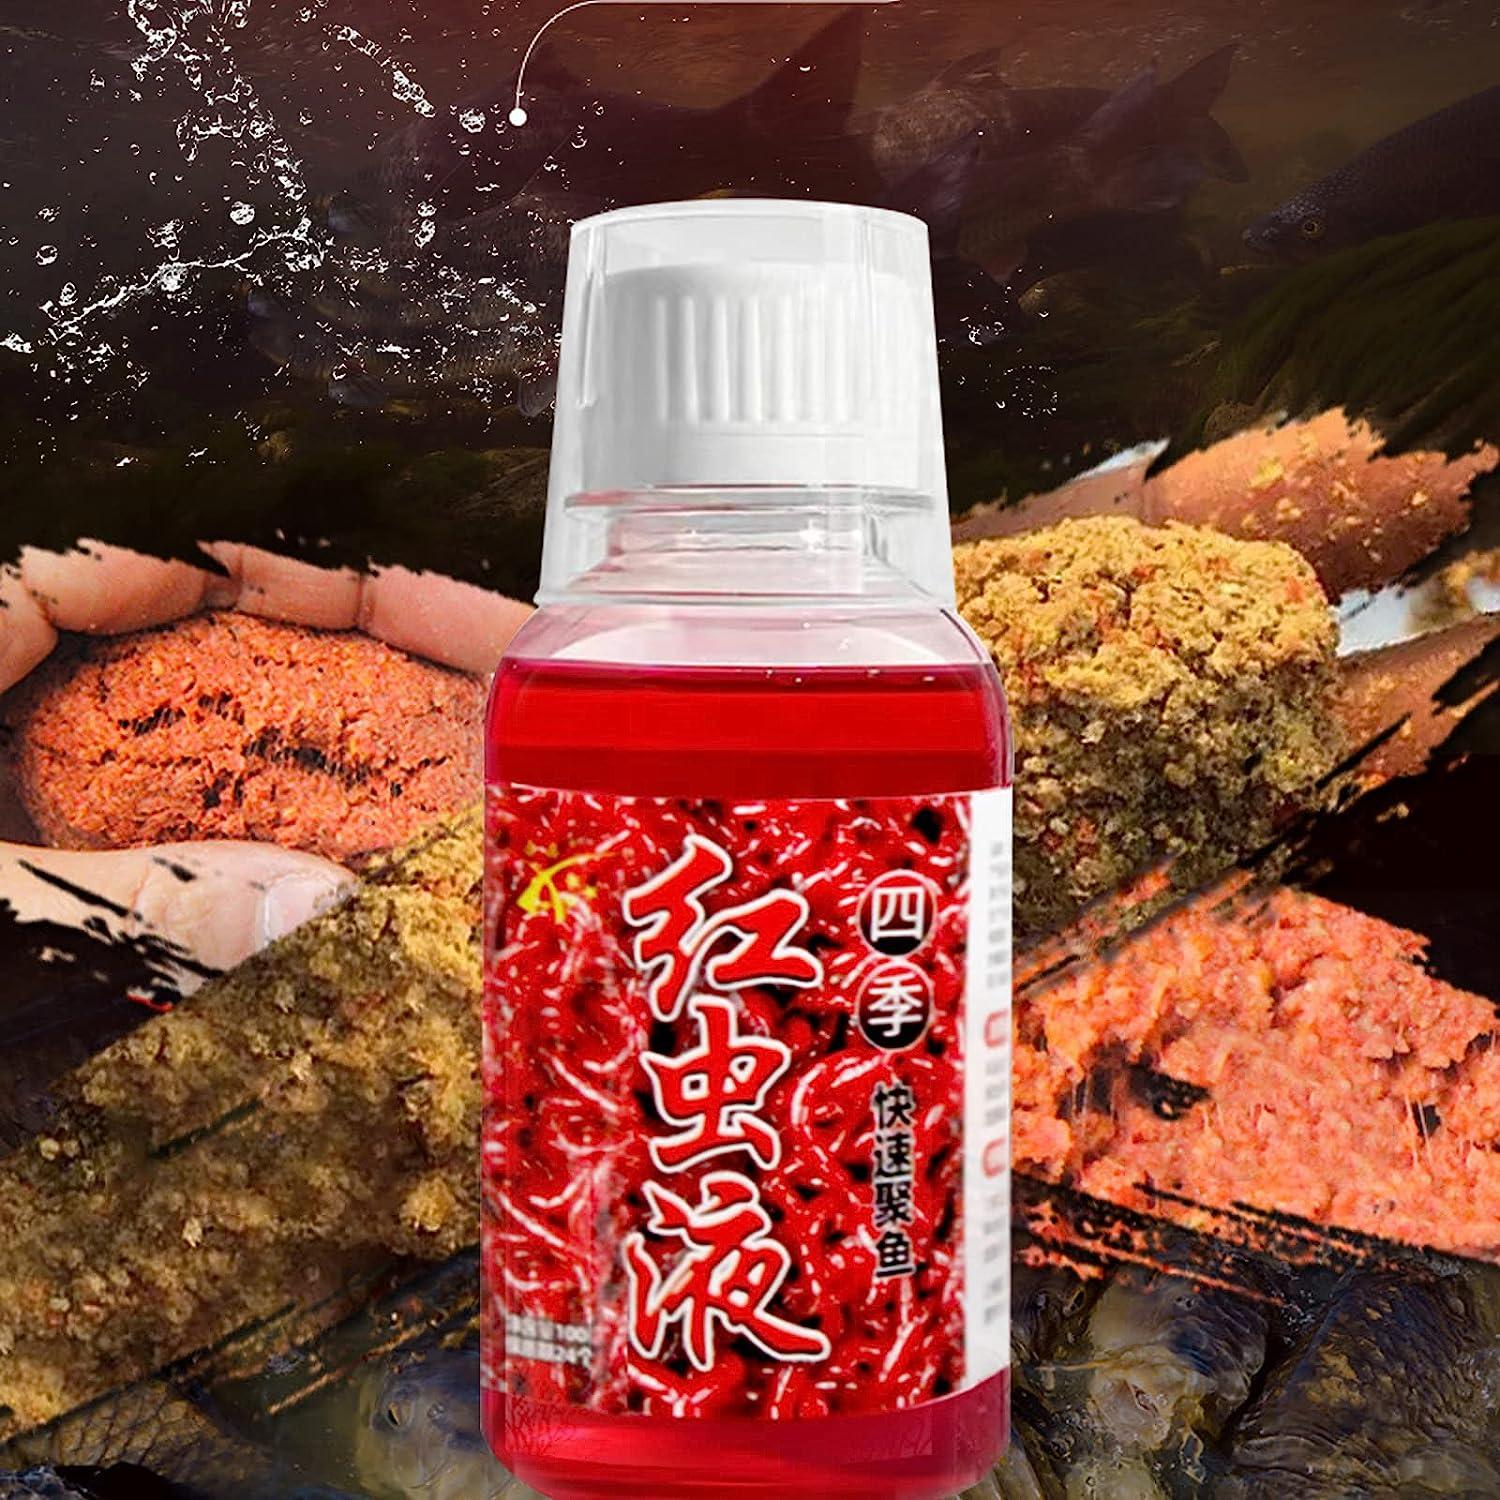 Red Worm Scent Fish Attractants for Baits,Red Worm Liquid Bait Concentrated Fishing  Lures Baits Red Worm Scent,100ml Chinese Red Worm Liquid for Crucian Carp  Tilapia Codfish 2PCS